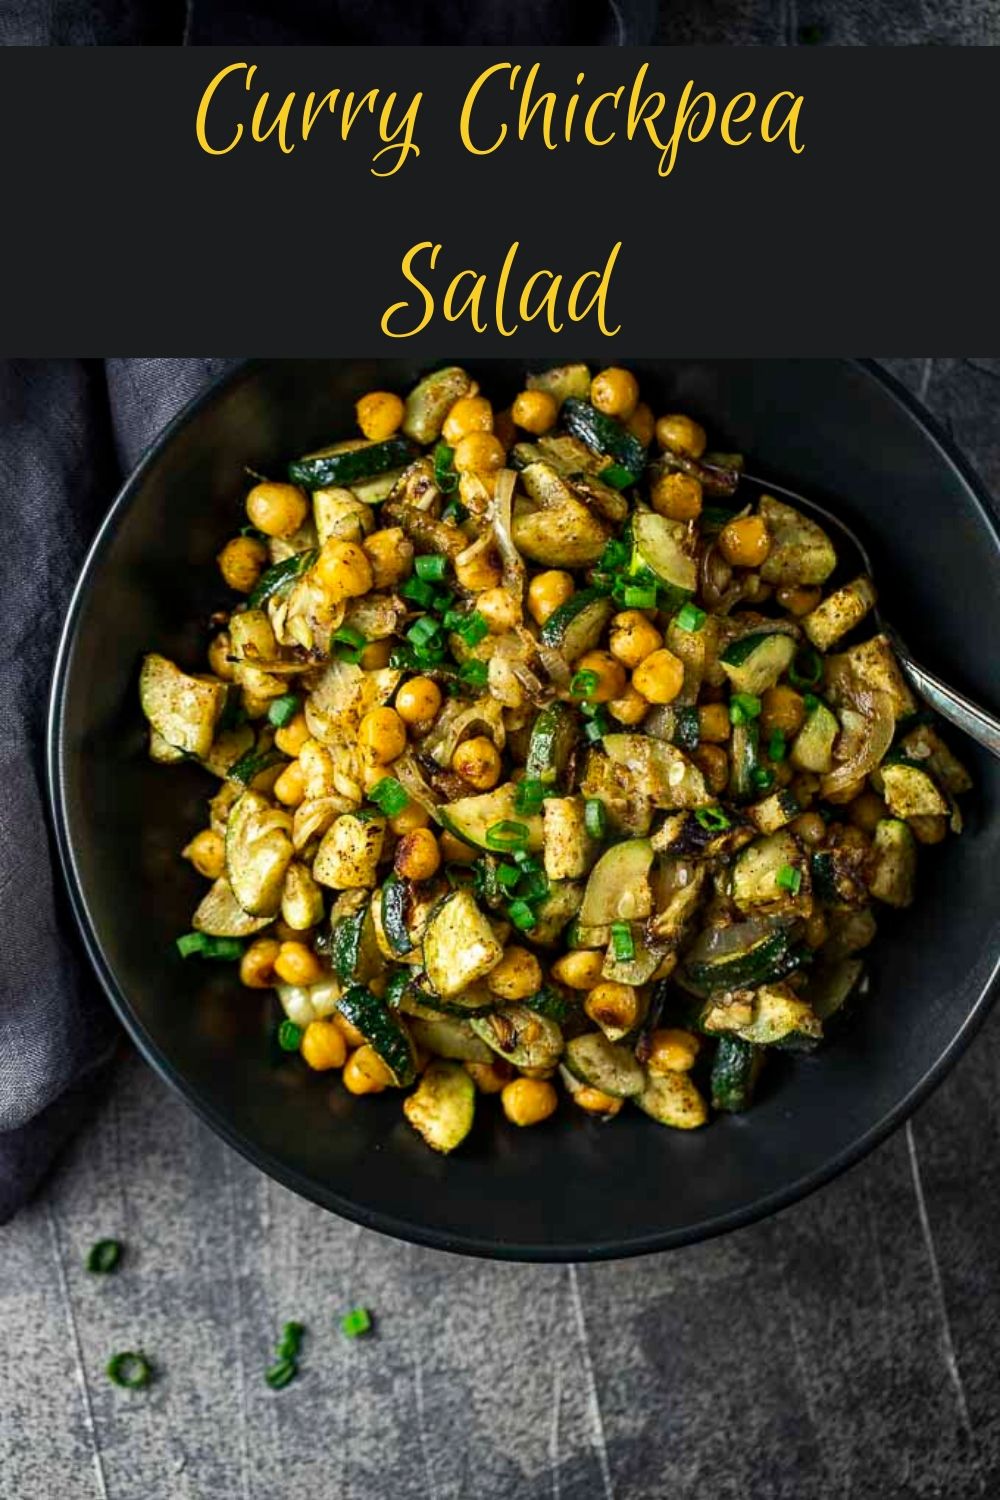 Warm Curried Chickpea Salad with Zucchini